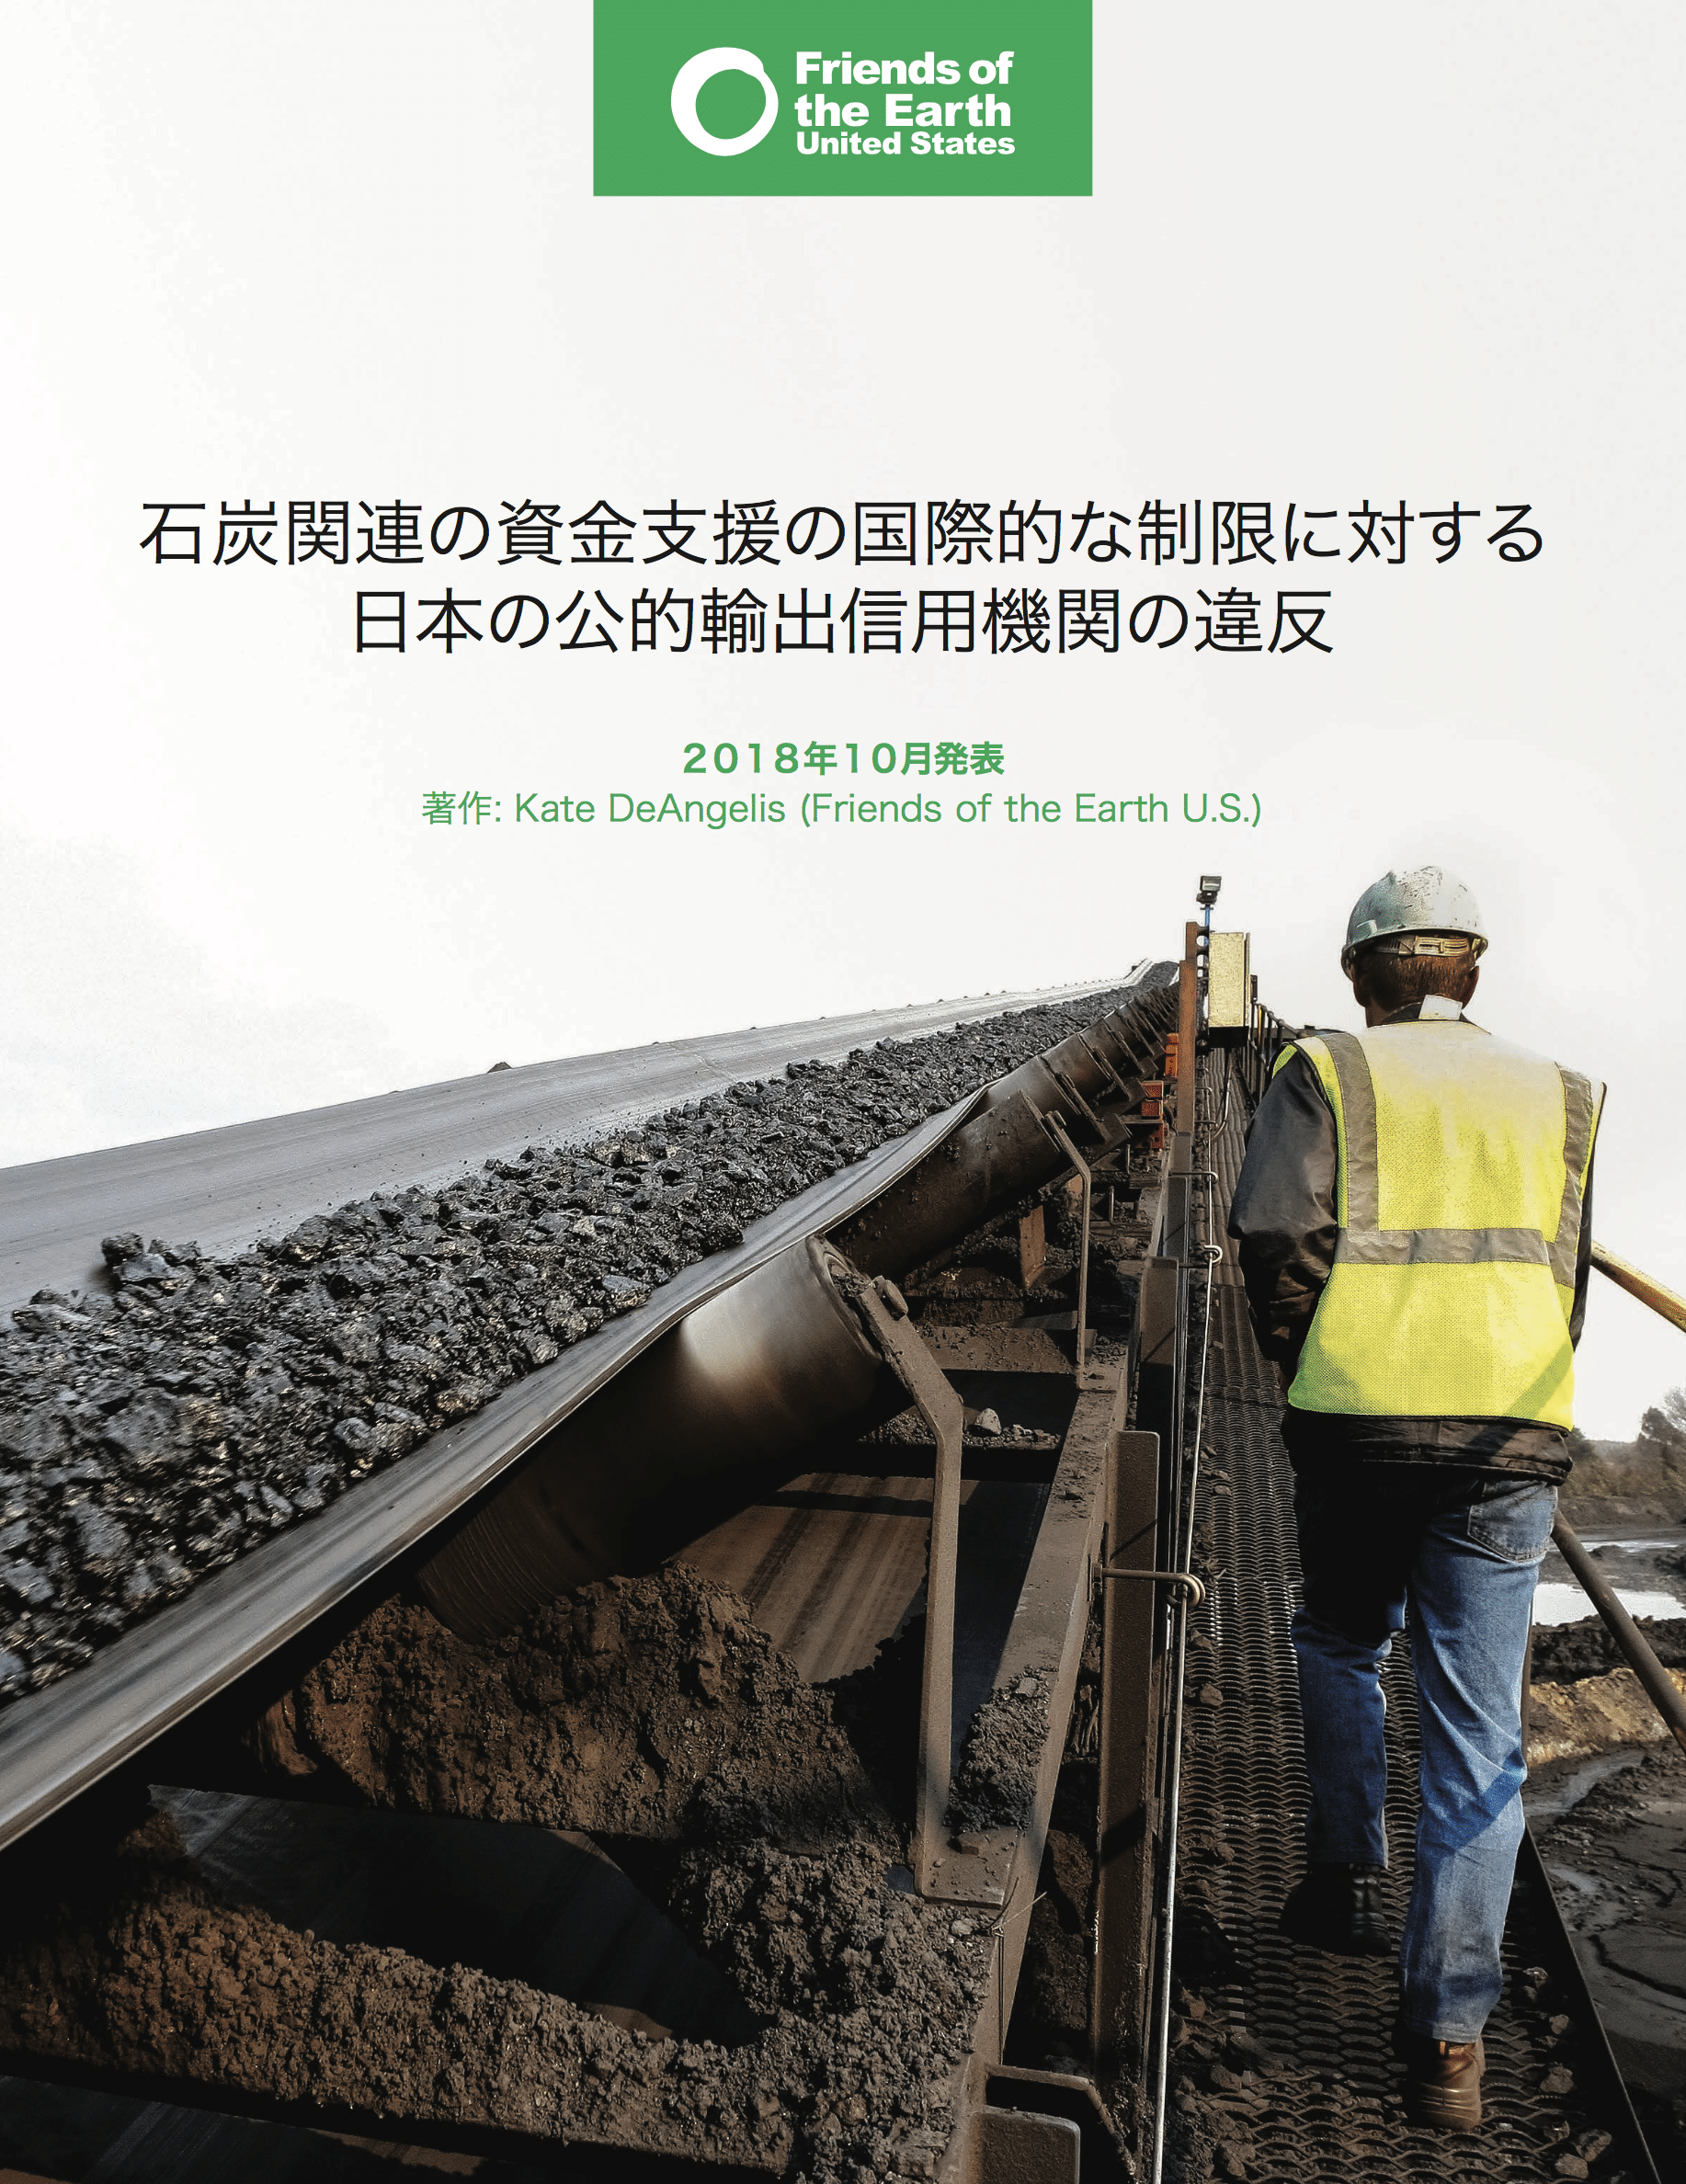 ECA Support for Coal in the Face of OECD Financing Restrictions (Japanese)